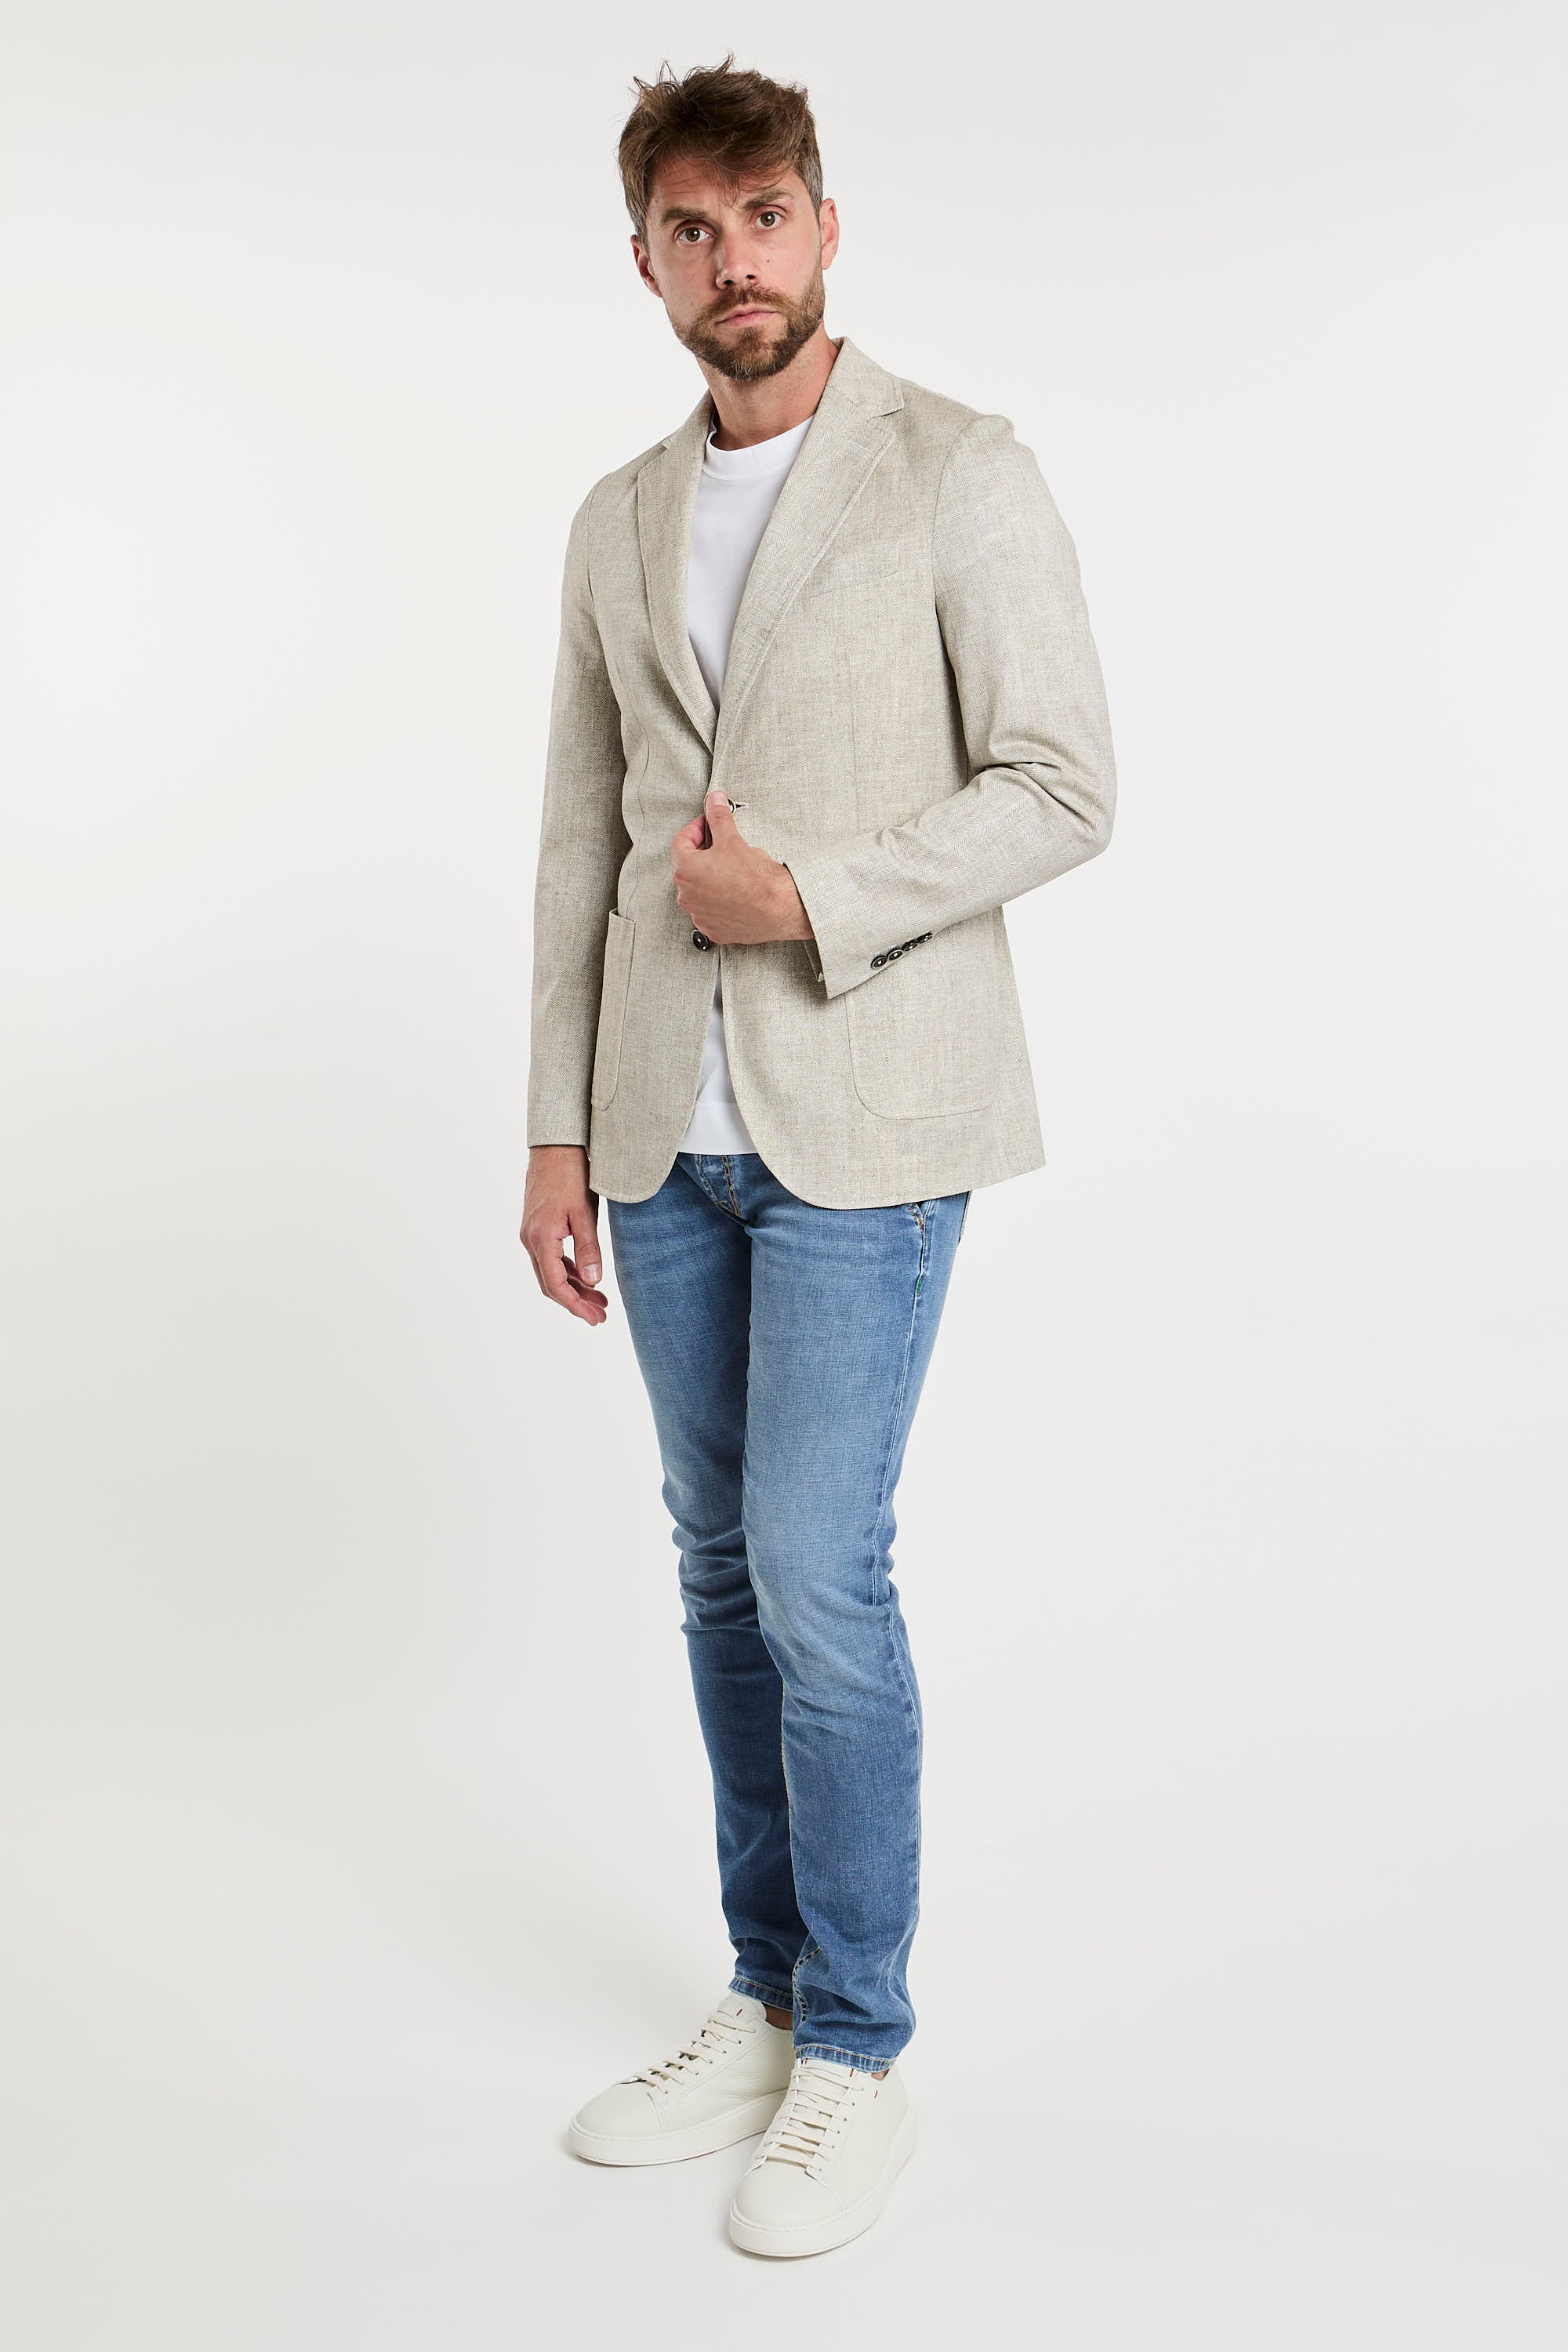 Circolo 1901 Cotton Jacket in Natural Beige-6